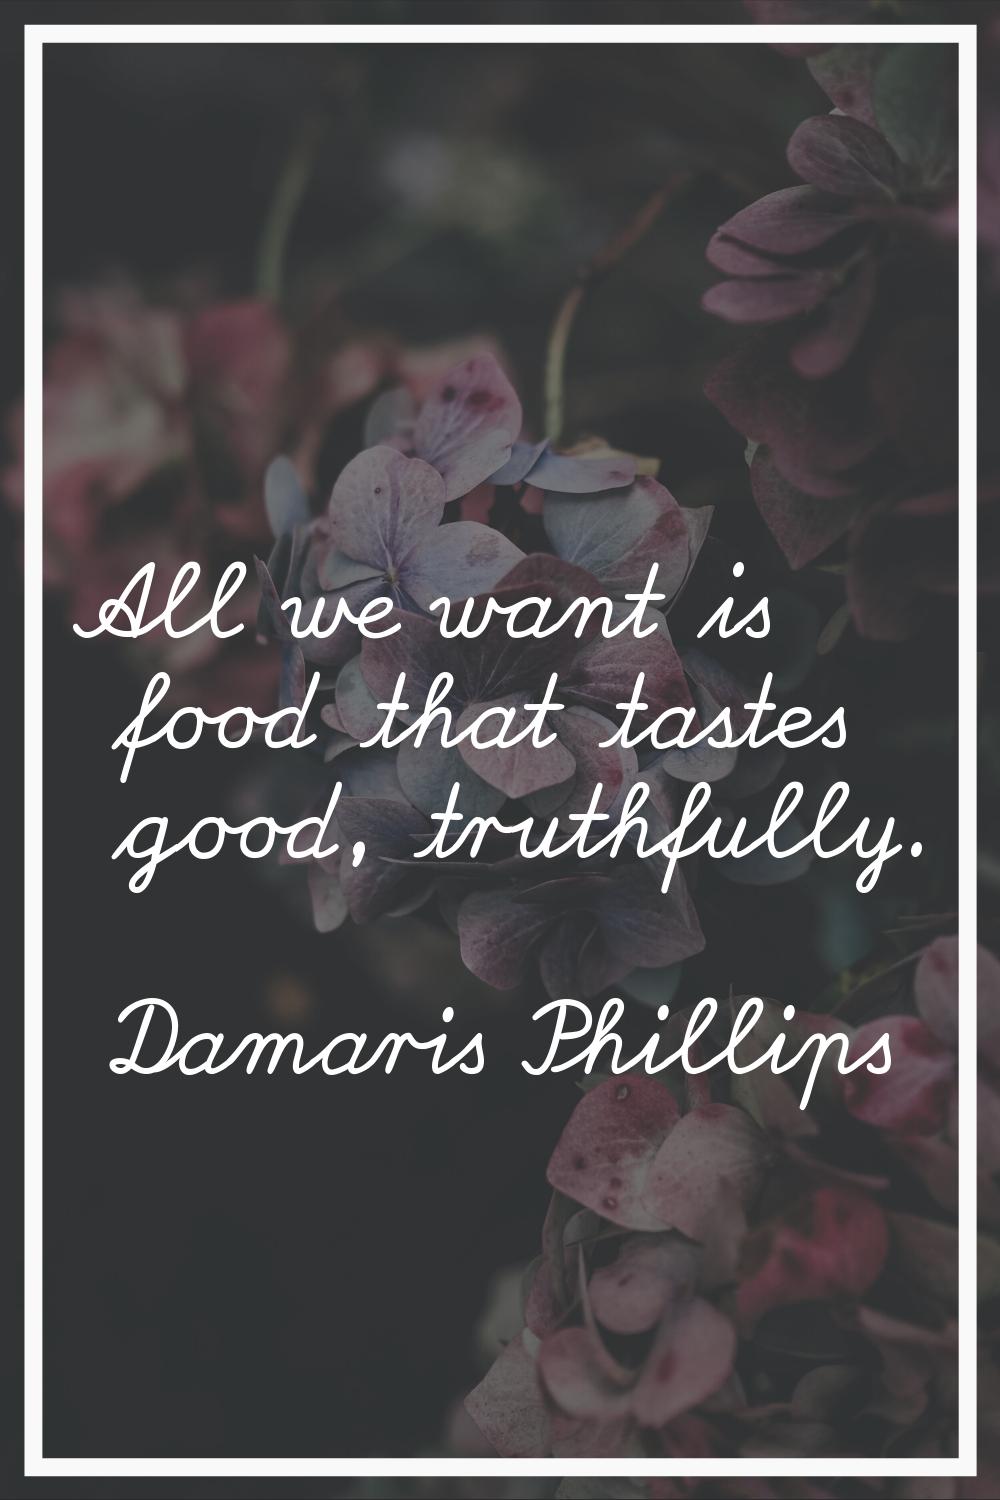 All we want is food that tastes good, truthfully.